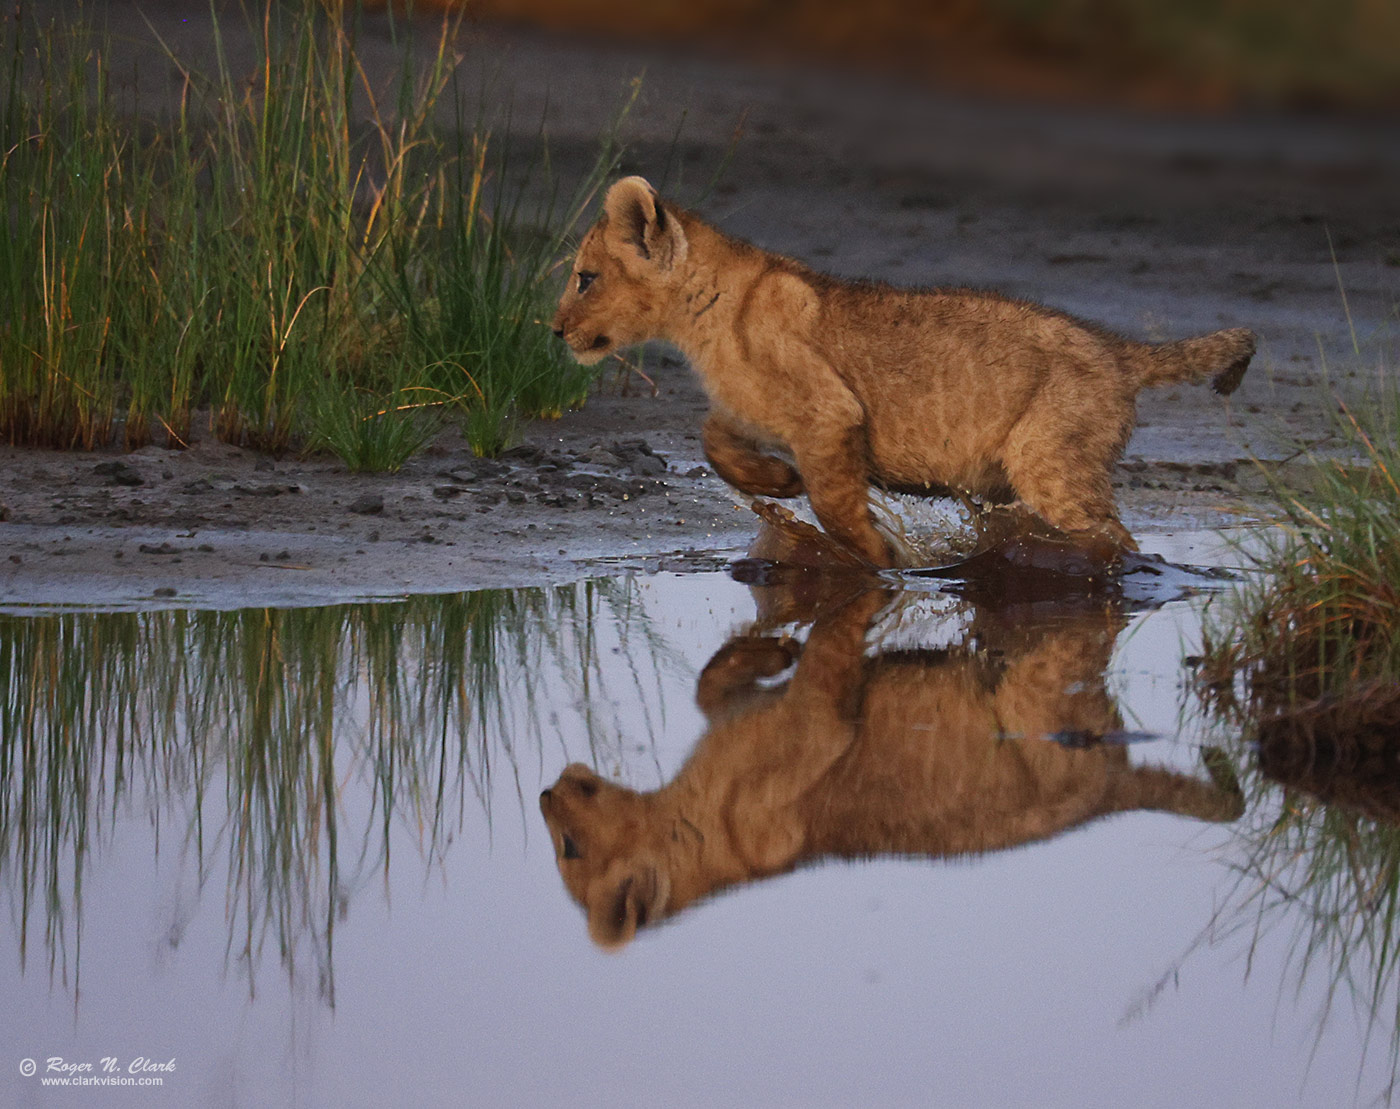 image lion-cub-running-reflection-c02-20-2024-4C3A1814-b-1400s.jpg is Copyrighted by Roger N. Clark, www.clarkvision.com